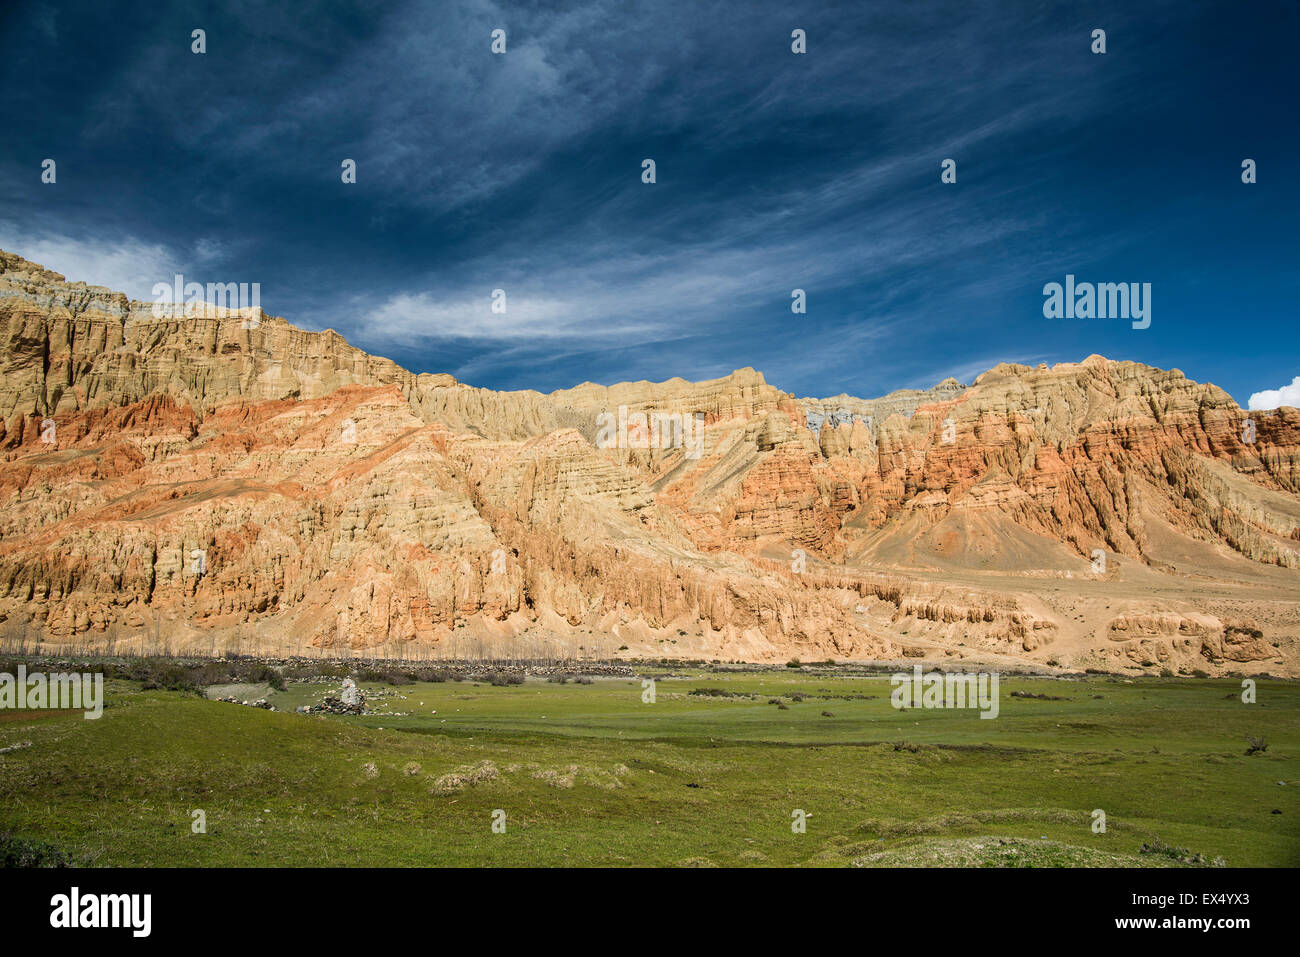 Red rock formations, Red Cliffs, erosion landscape, Dhakmar, former Kingdom of Mustang, Nepal Stock Photo